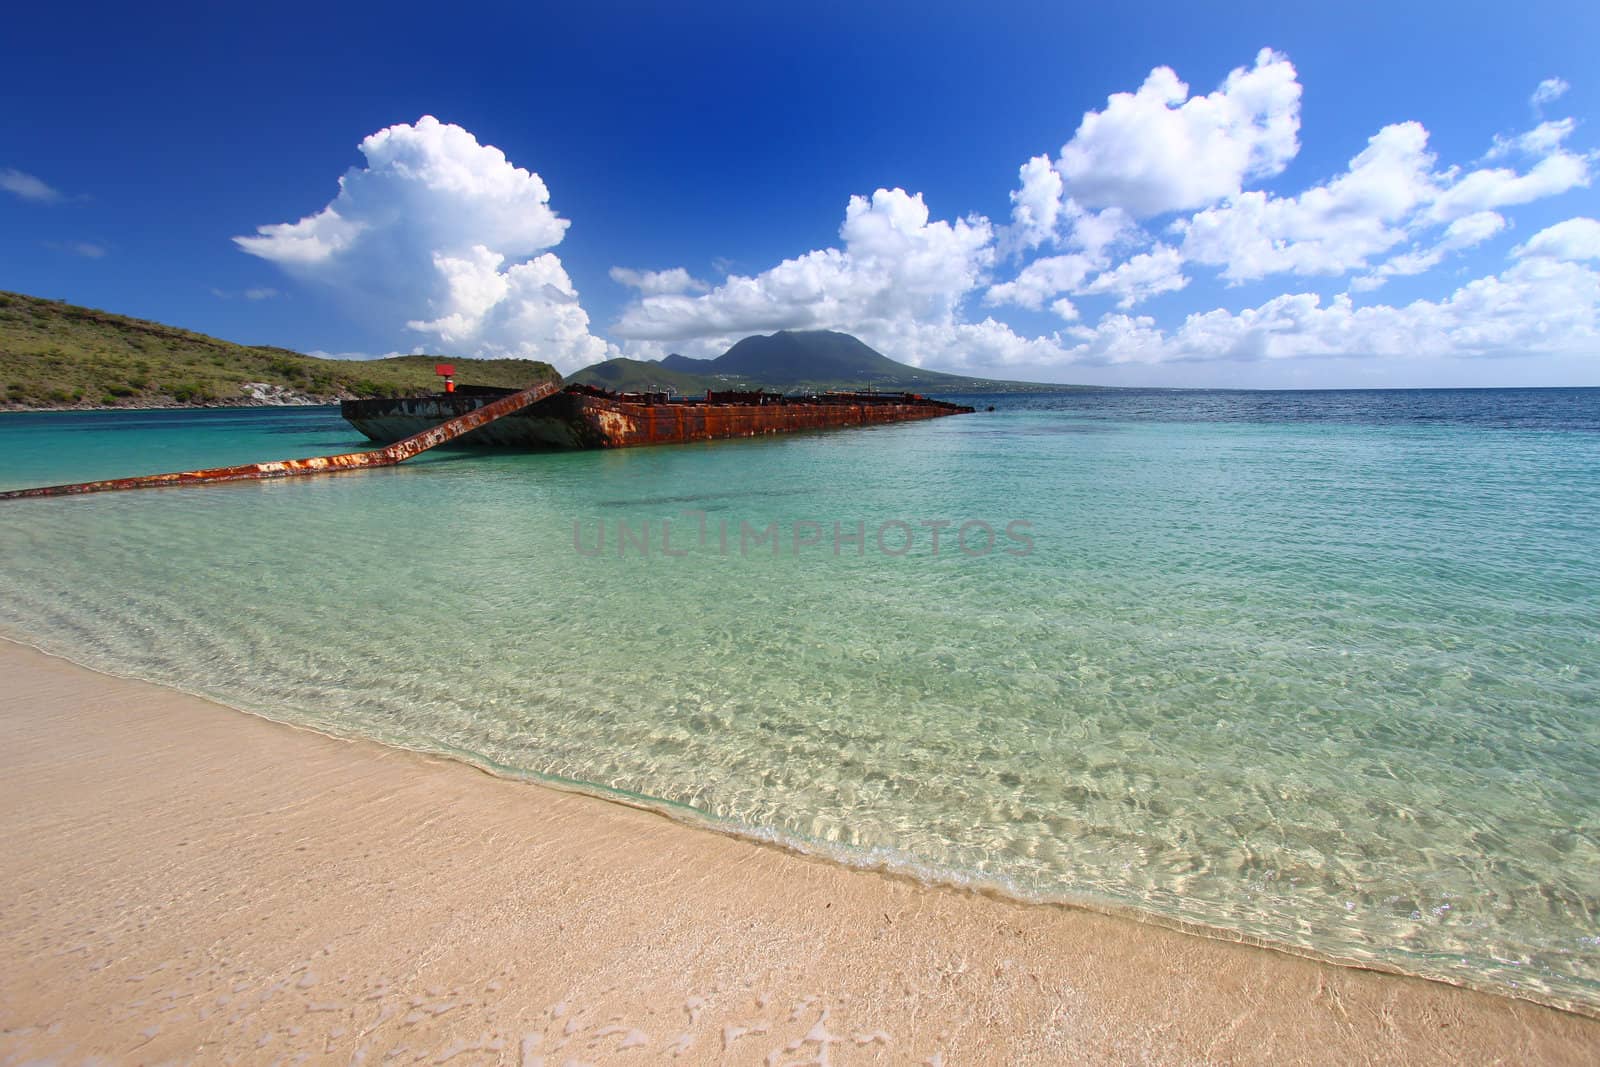 Wrecked Barge in Majors Bay (St Kitts) by Wirepec